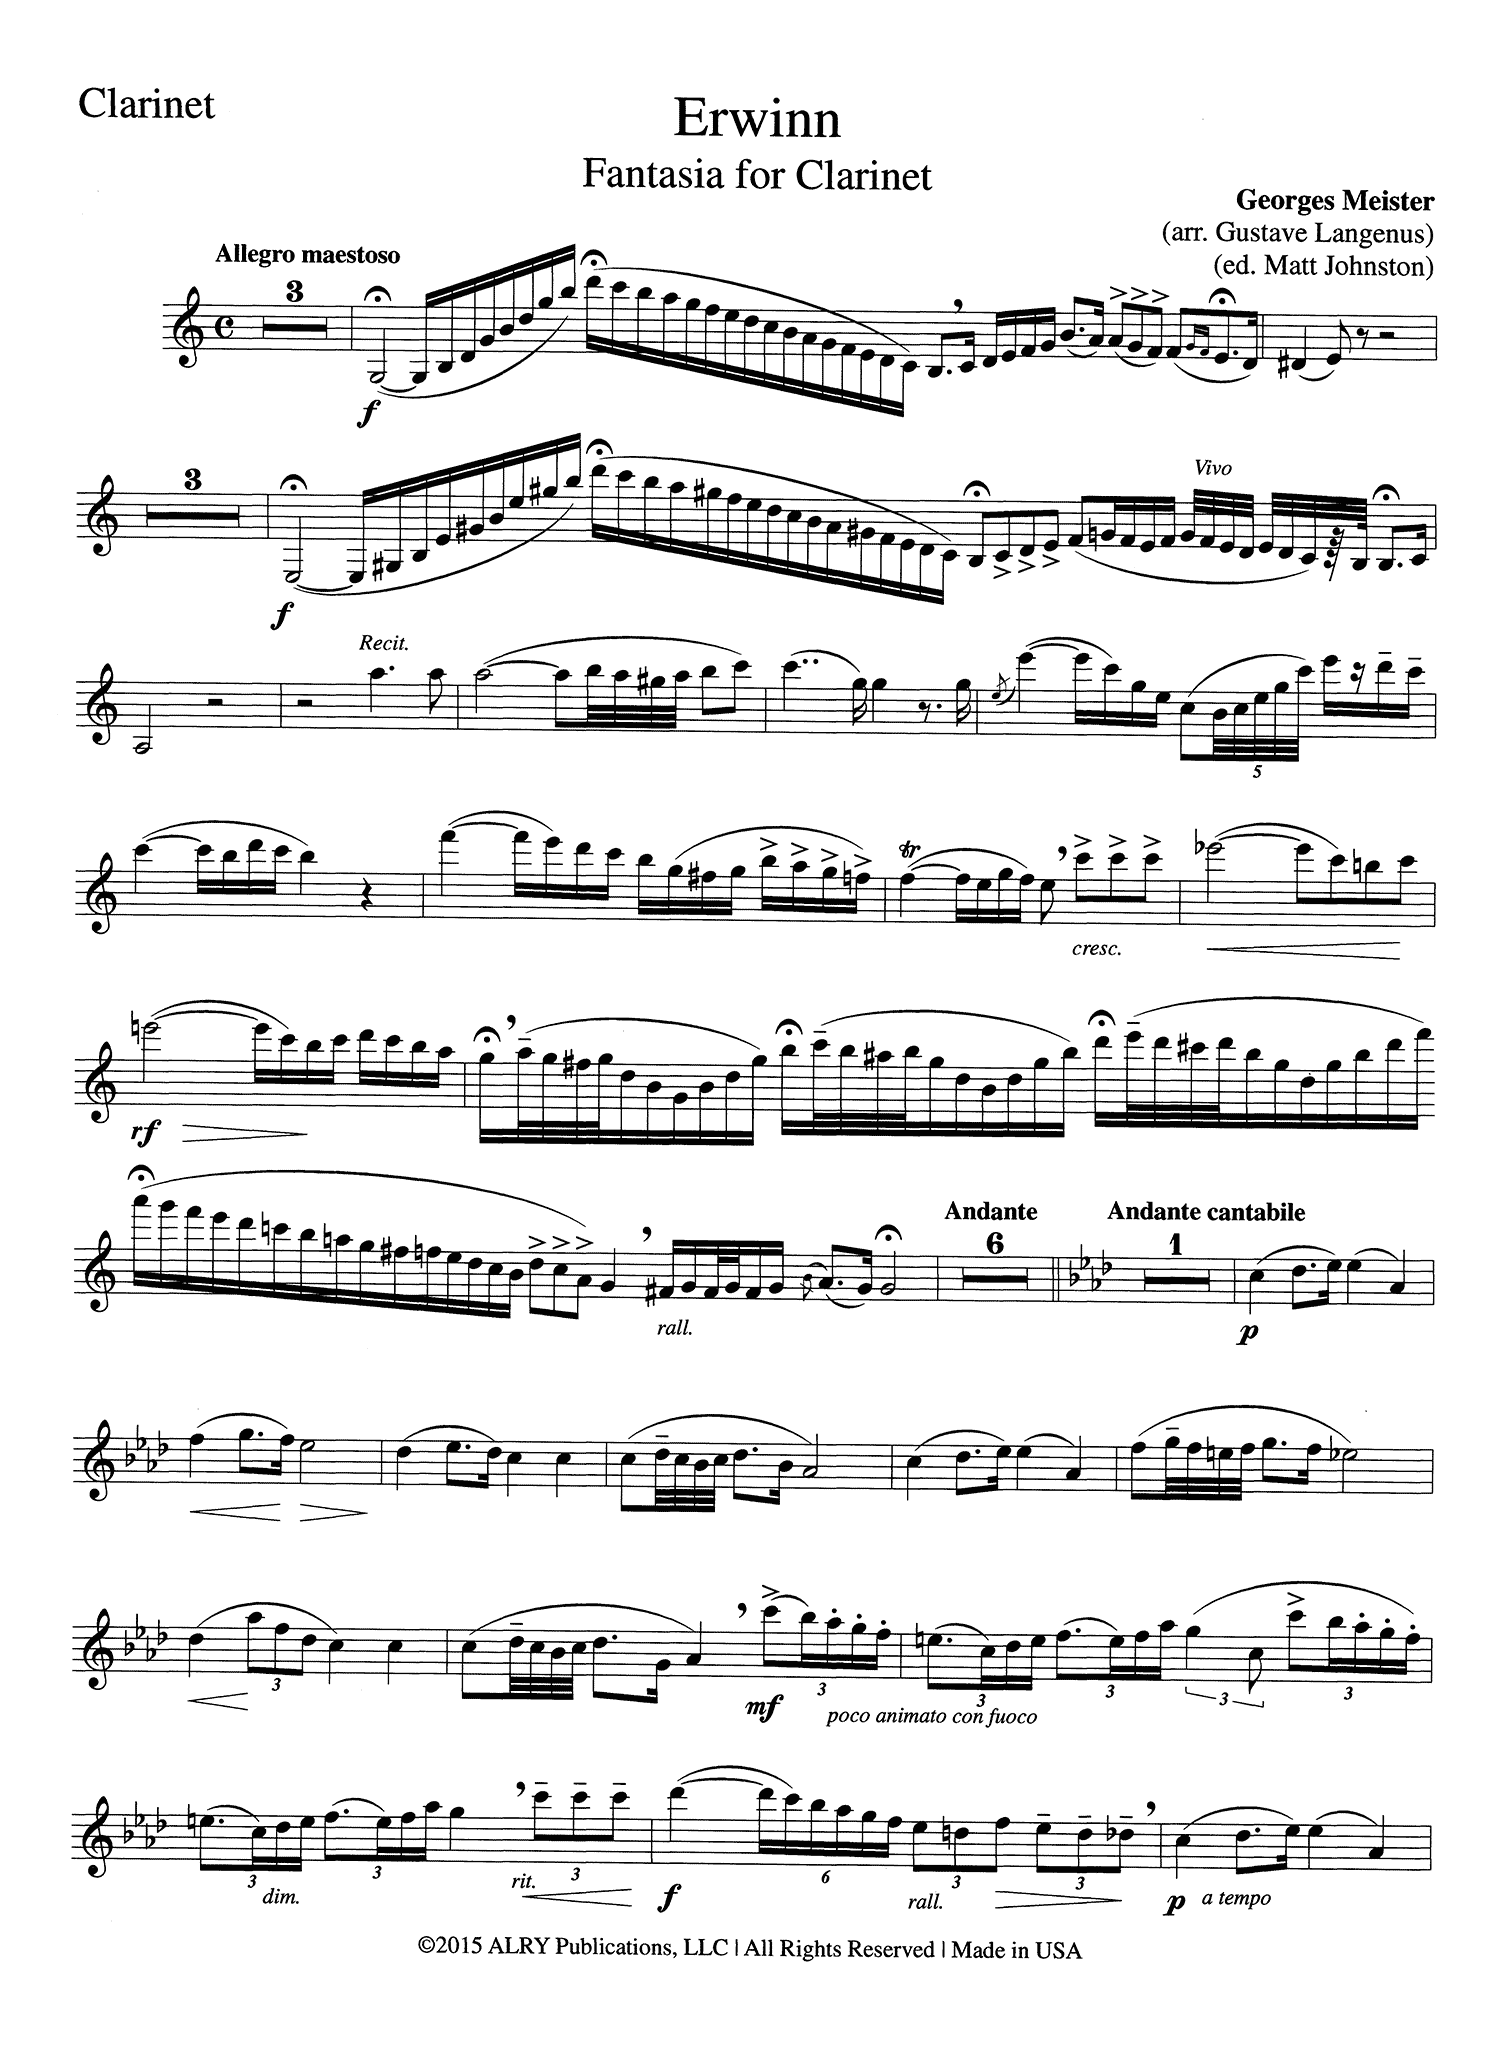 Georges Meister Erwinn Fantasia clarinet and piano solo part